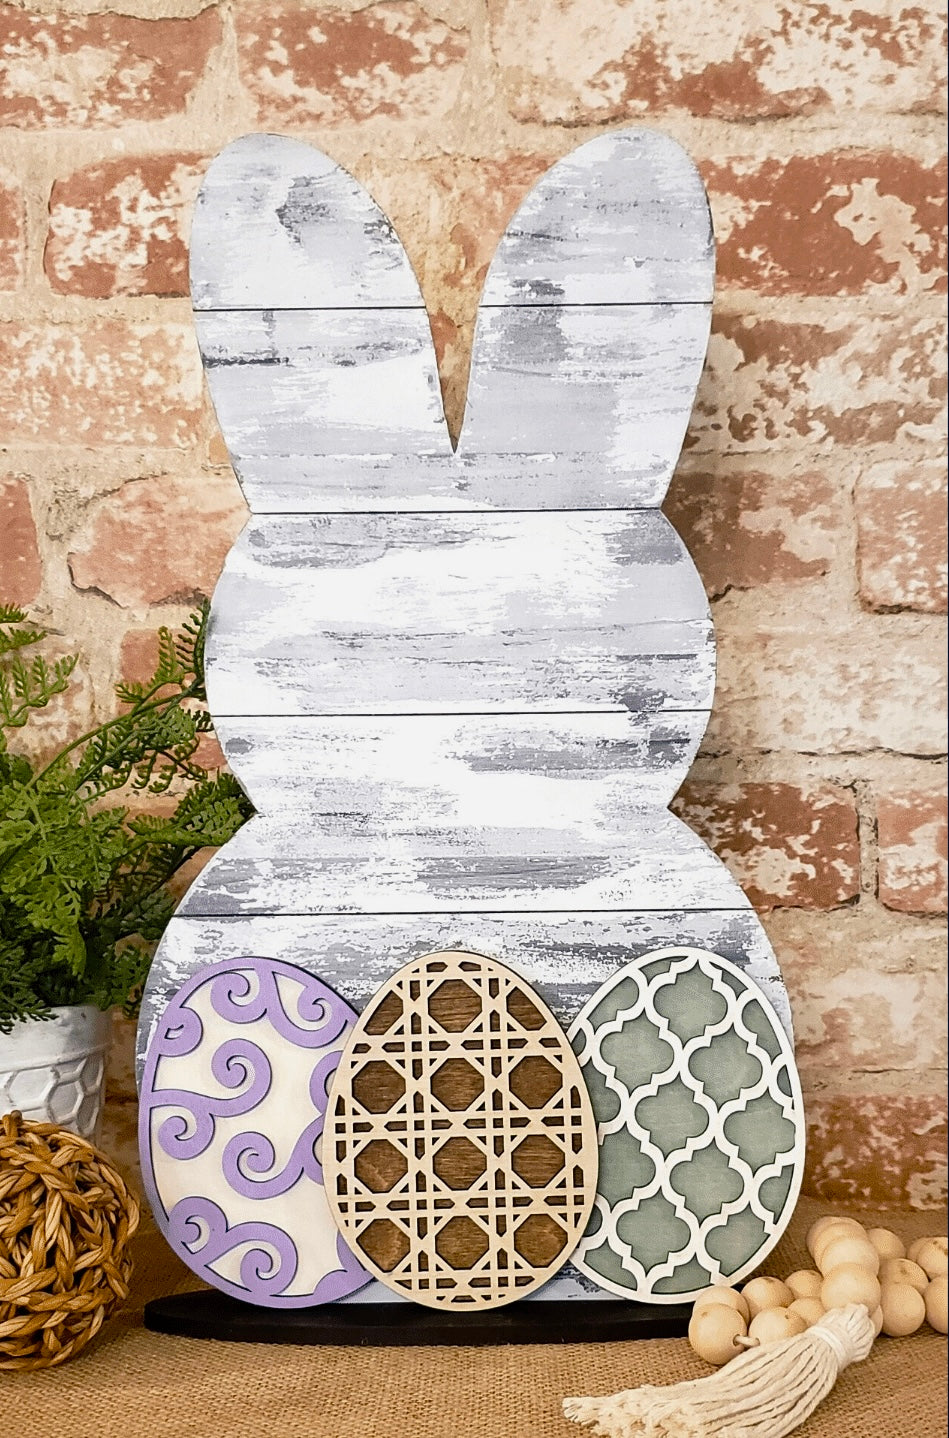 Shiplap Standing Bunny -  In - Person Workshop or Take Home Kit